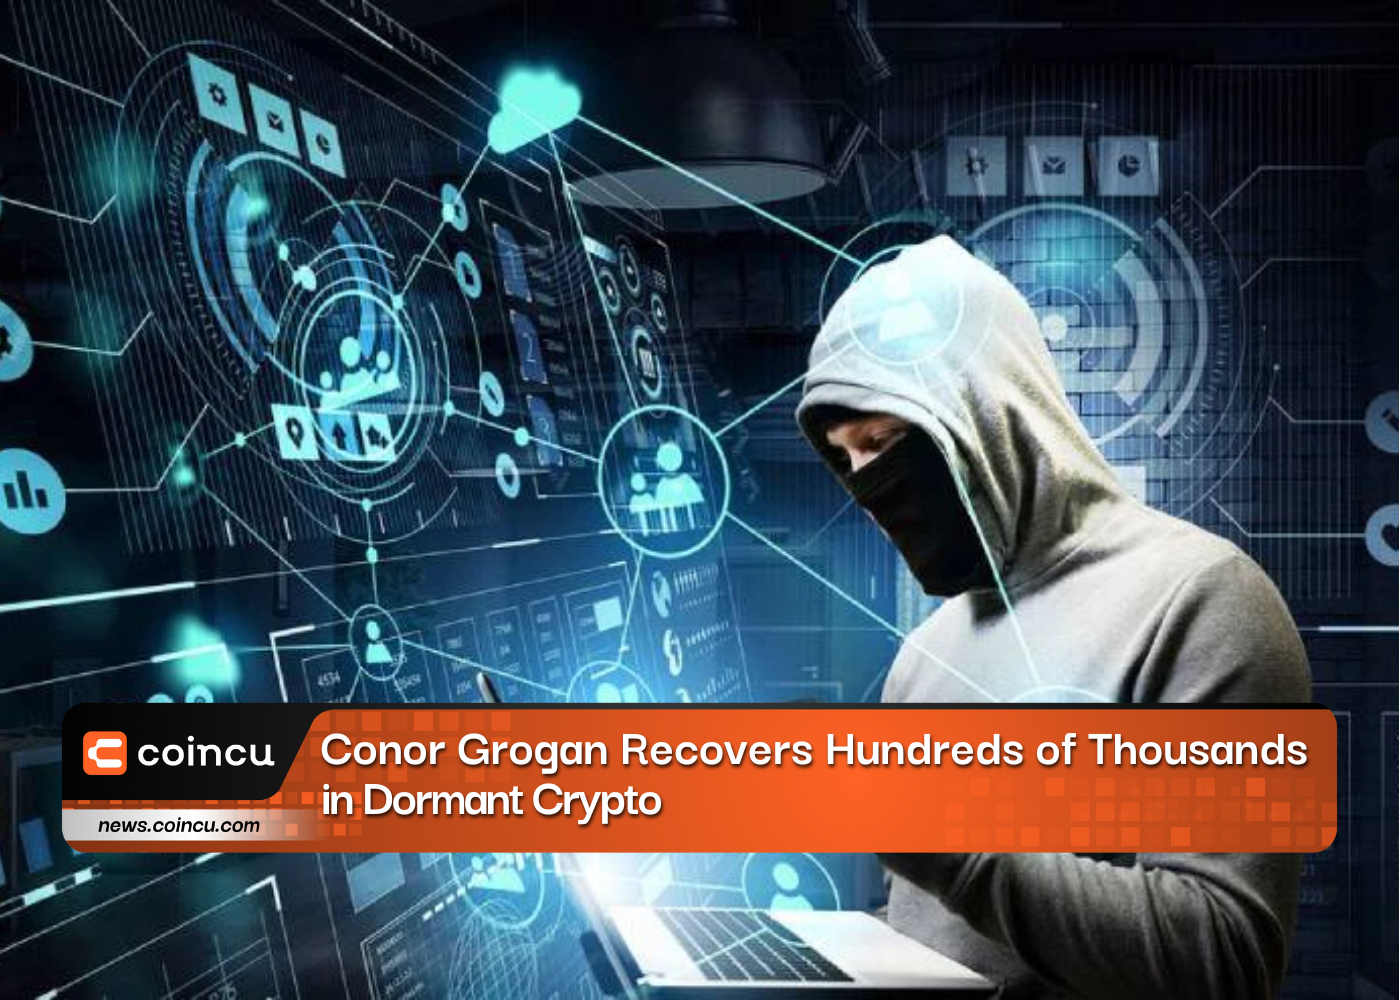 Conor Grogan Recovers Hundreds of Thousands in Dormant Crypto